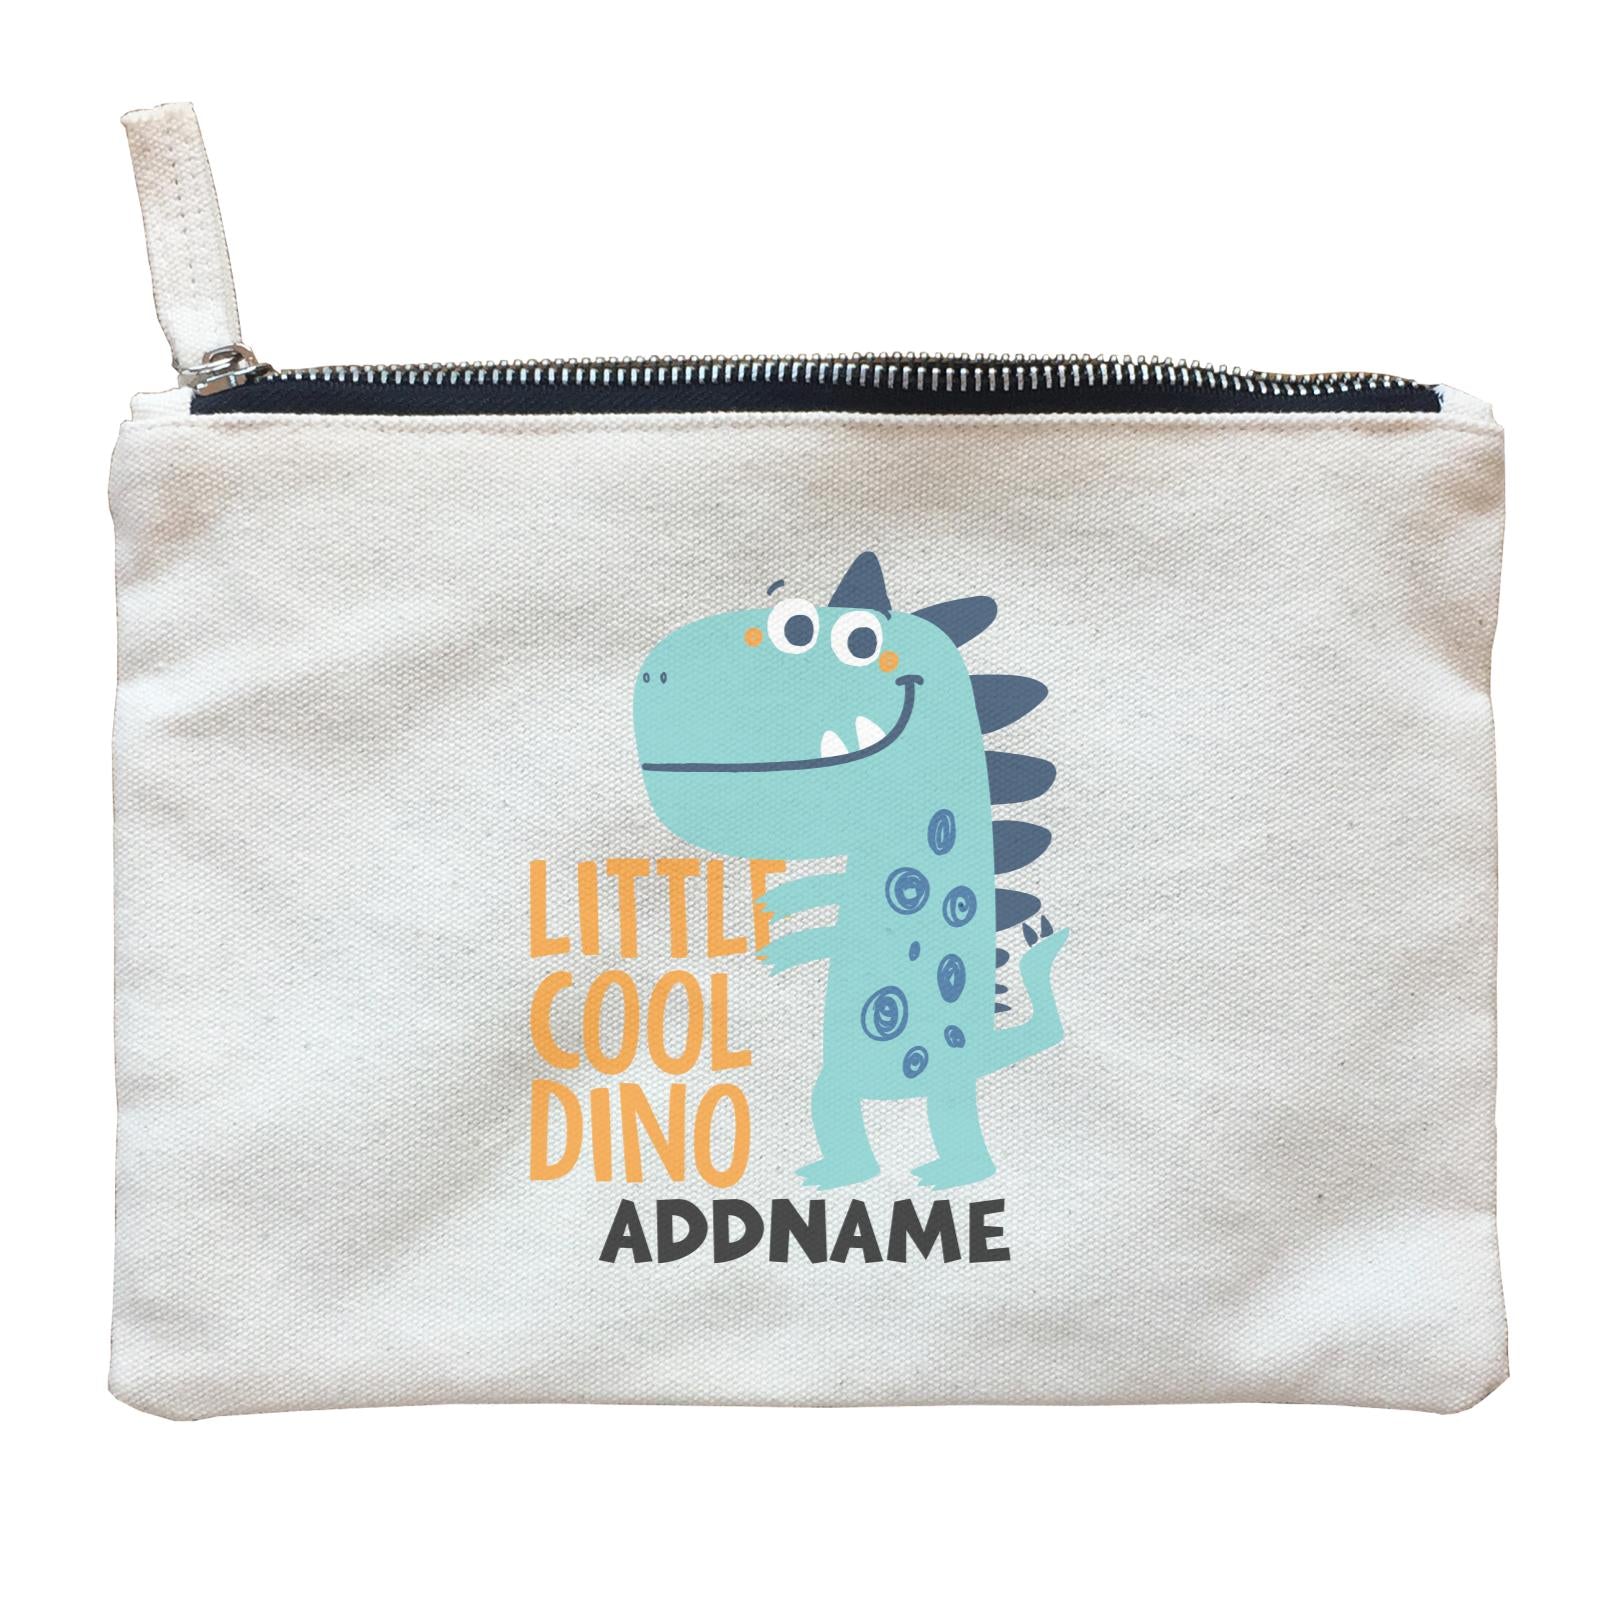 Little Cool Dino Addname Bag Zipper Pouch